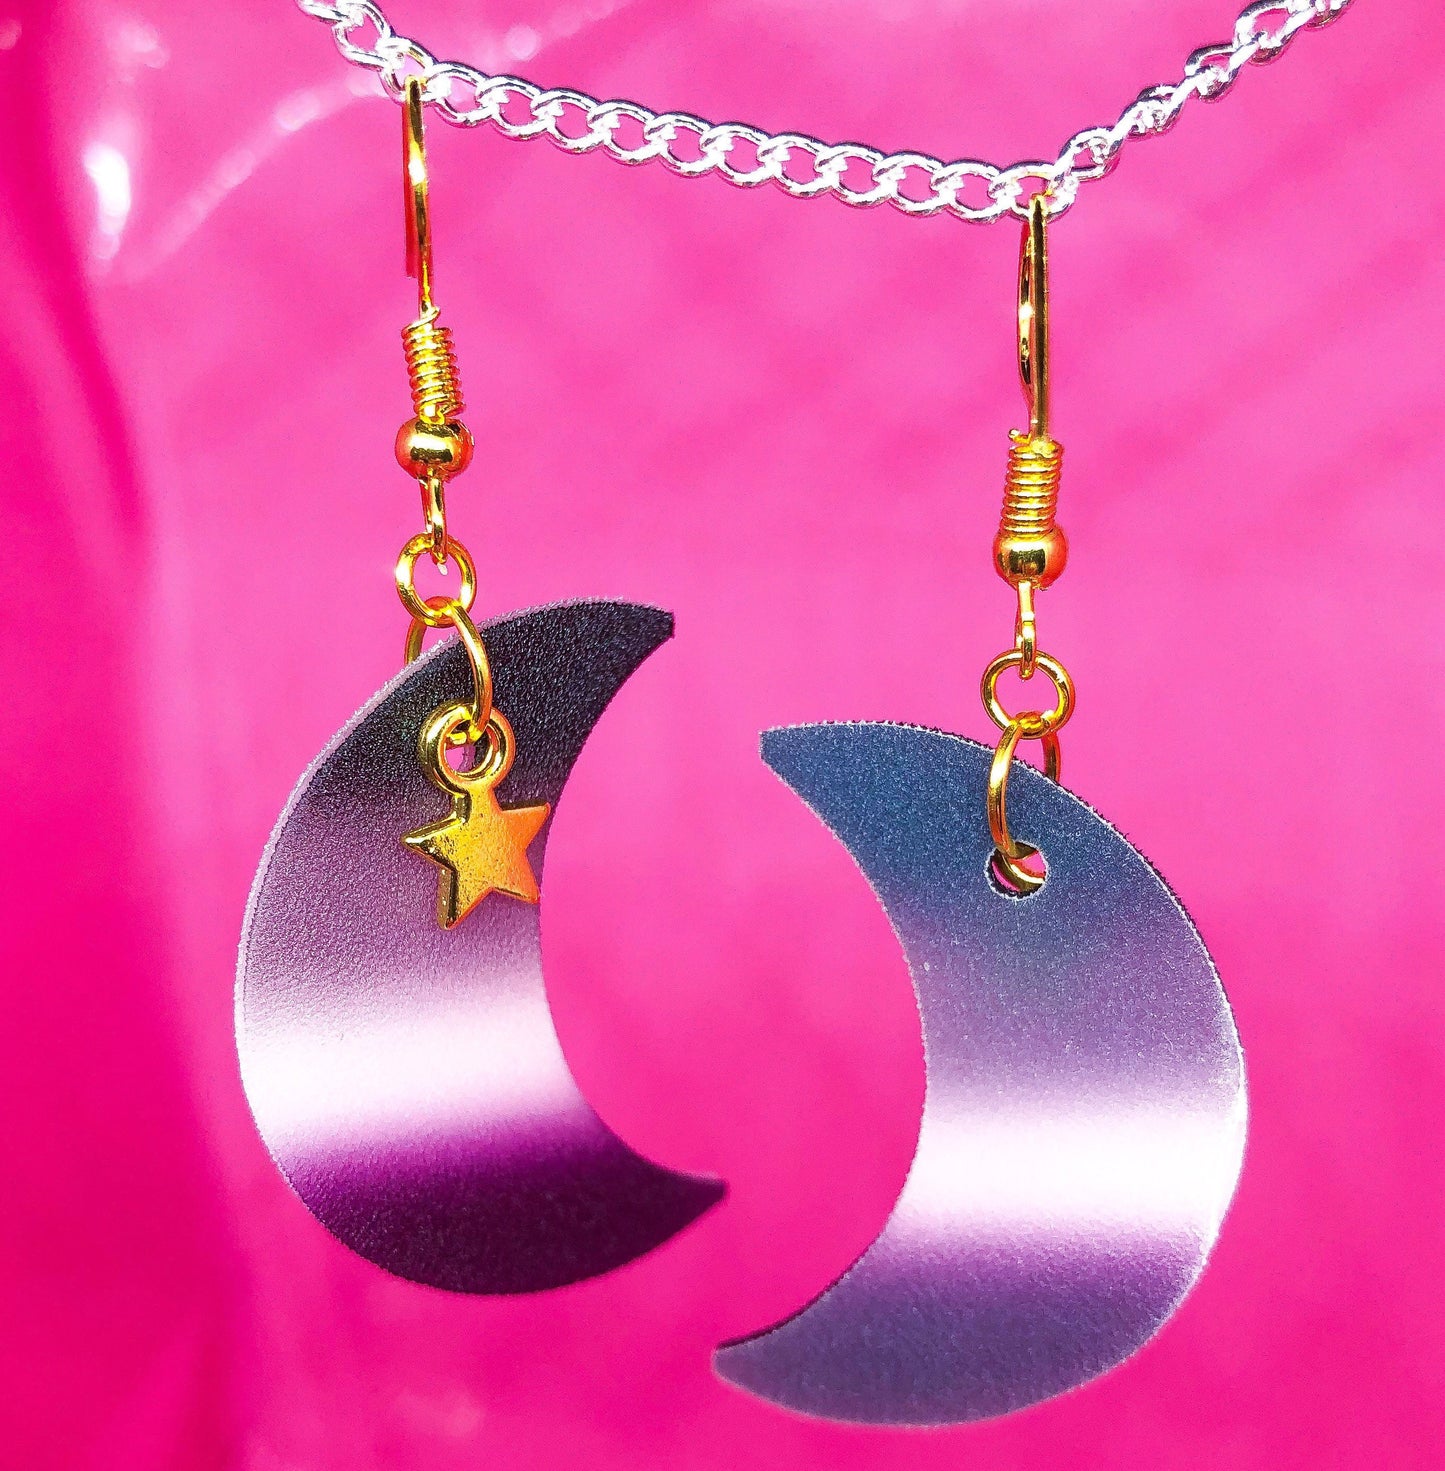 Shrinky dink earrings in the shape of a crescent moon. The colour of the charm is the asexual pride flag with a small gold star charm hanging at the top.